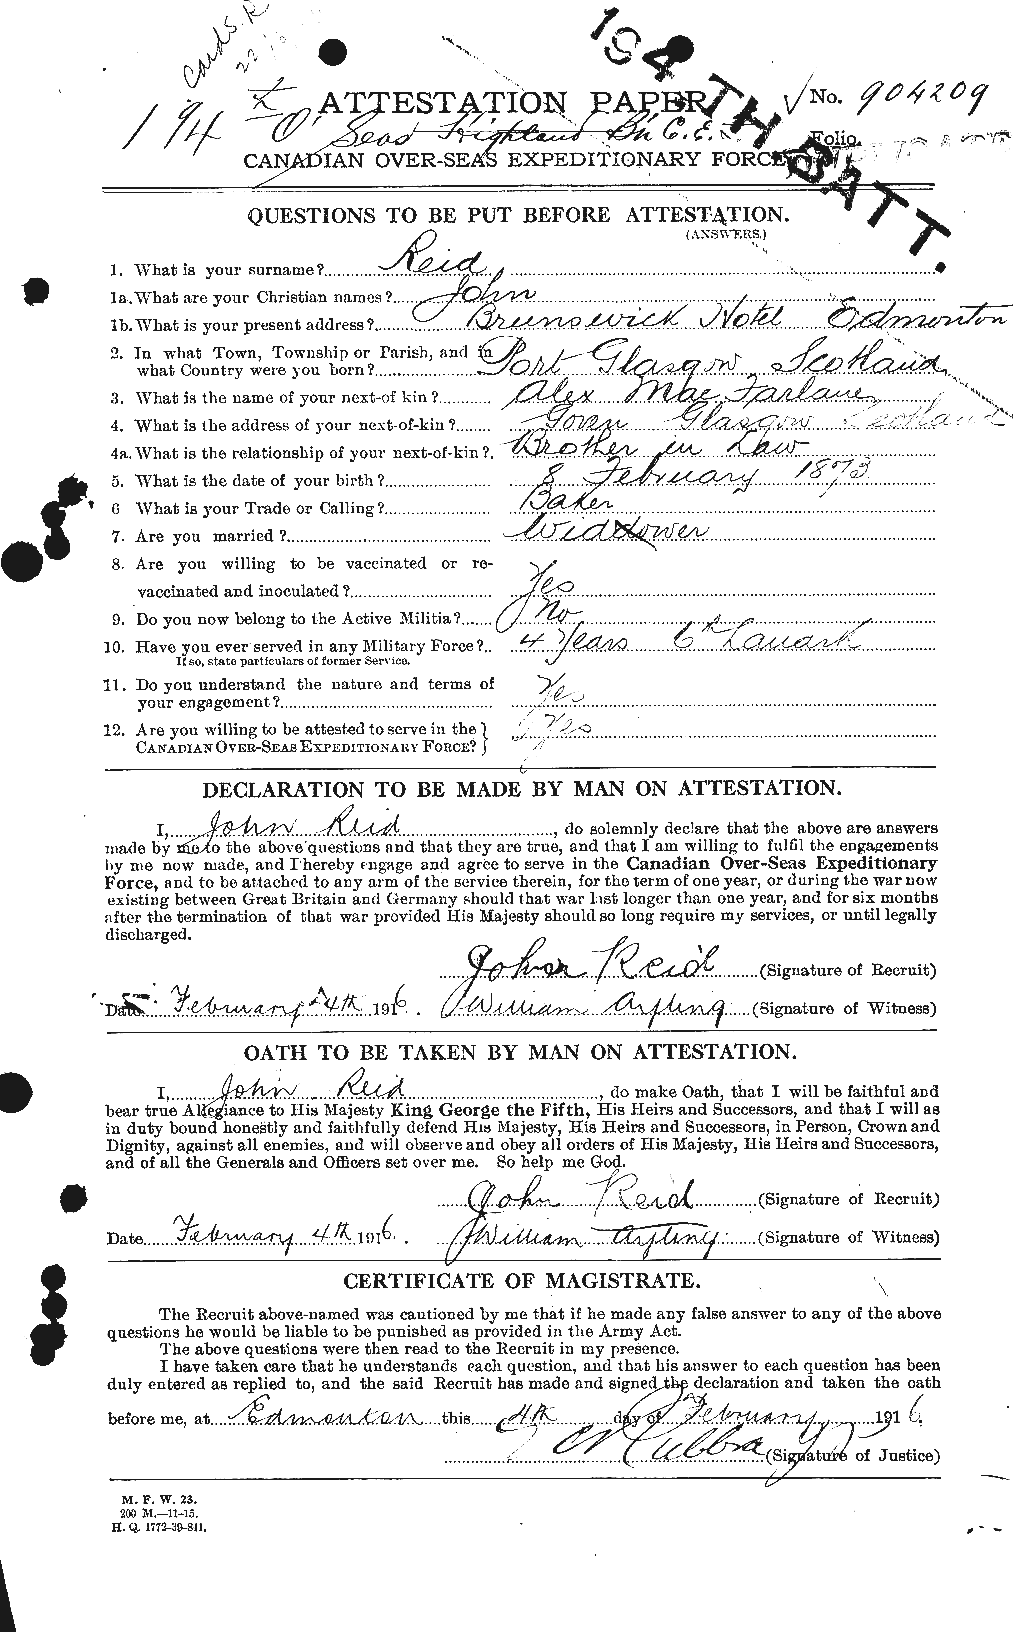 Personnel Records of the First World War - CEF 598810a